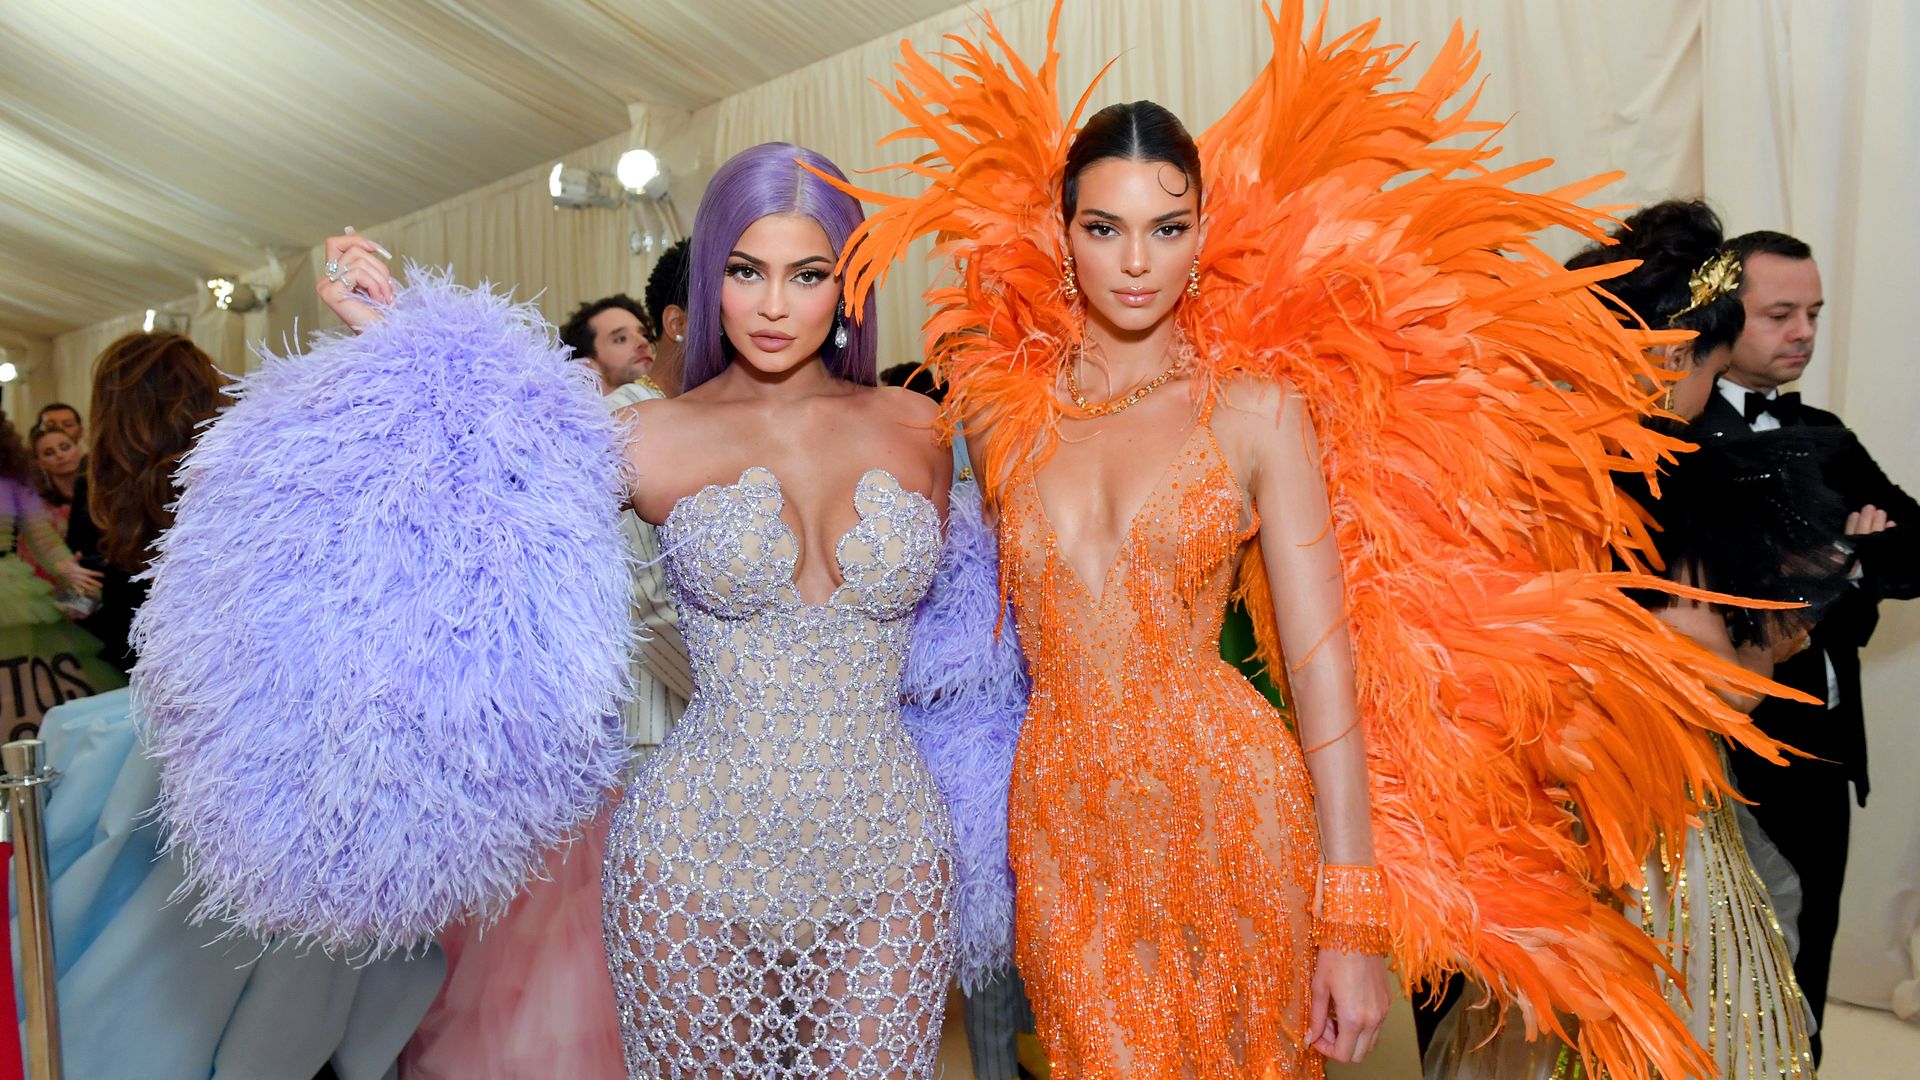 NEW YORK, NEW YORK - MAY 06: Kylie Jenner and Kendall Jenner attend The 2019 Met Gala Celebrating Camp: Notes on Fashion at Metropolitan Museum of Art on May 06, 2019 in New York City. (Photo by Mike Coppola/MG19/Getty Images for The Met Museum/Vogue )